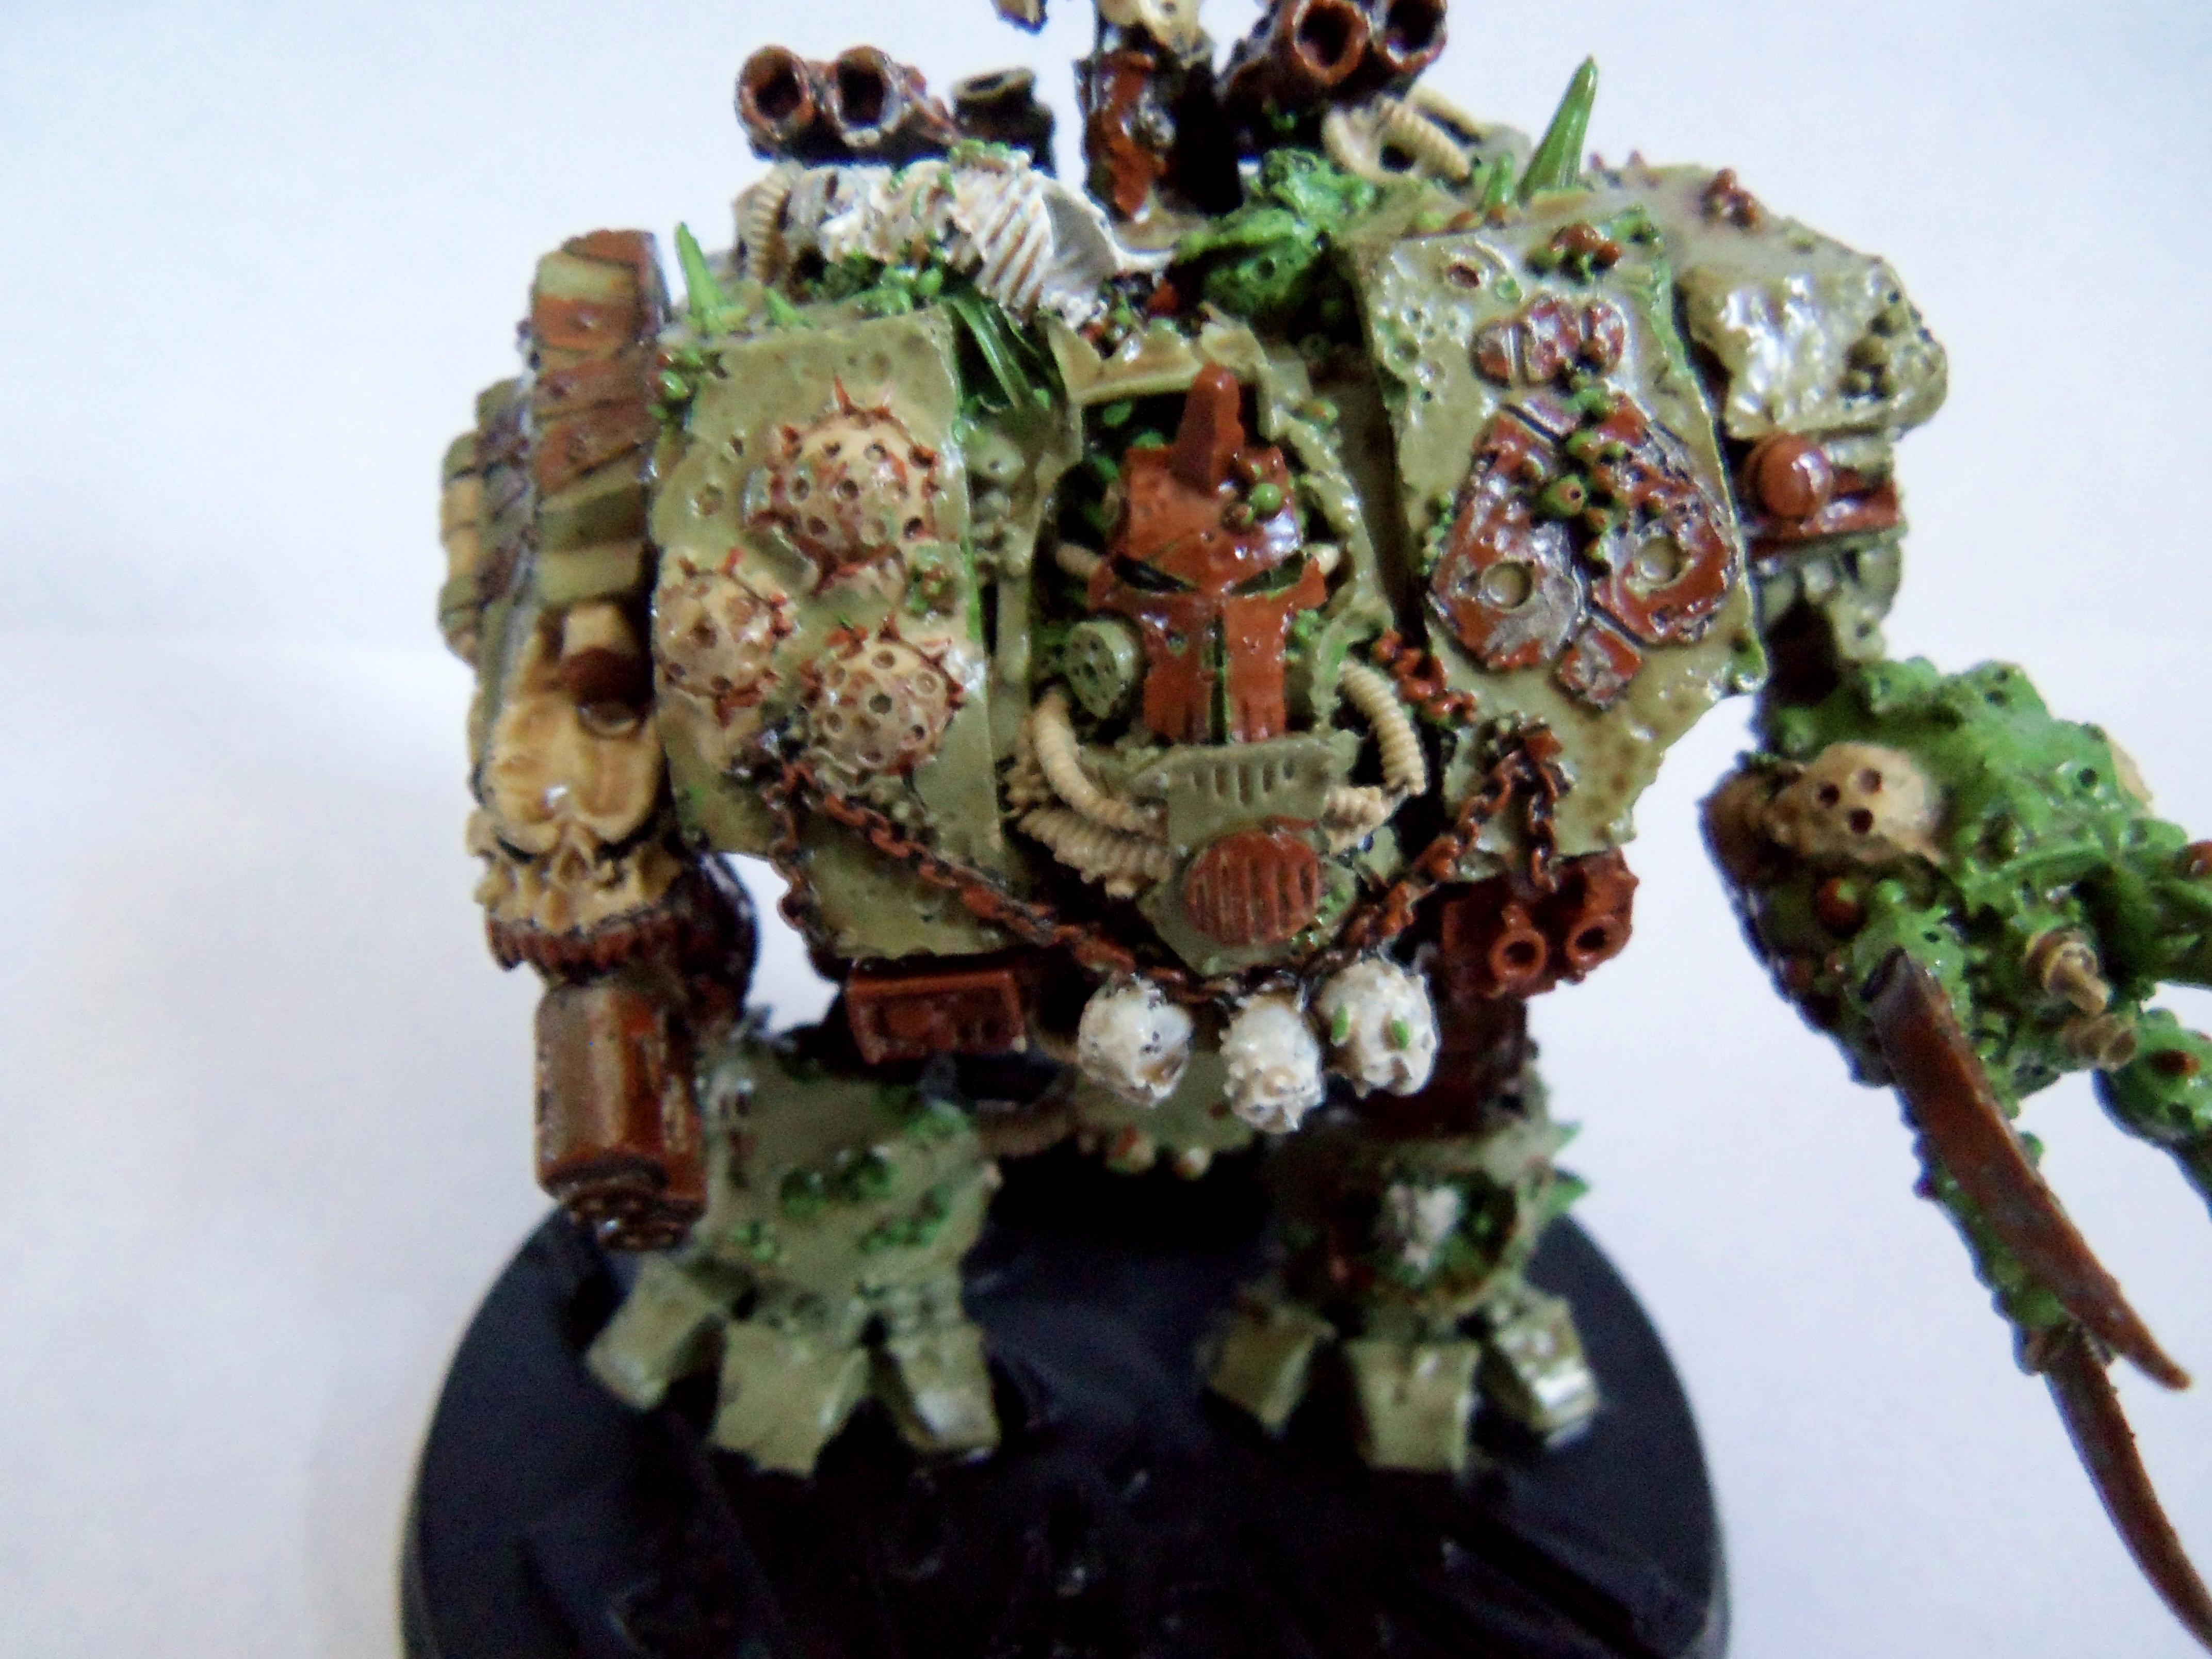 Chaos Space Marines, Dreadnought, Nurgle